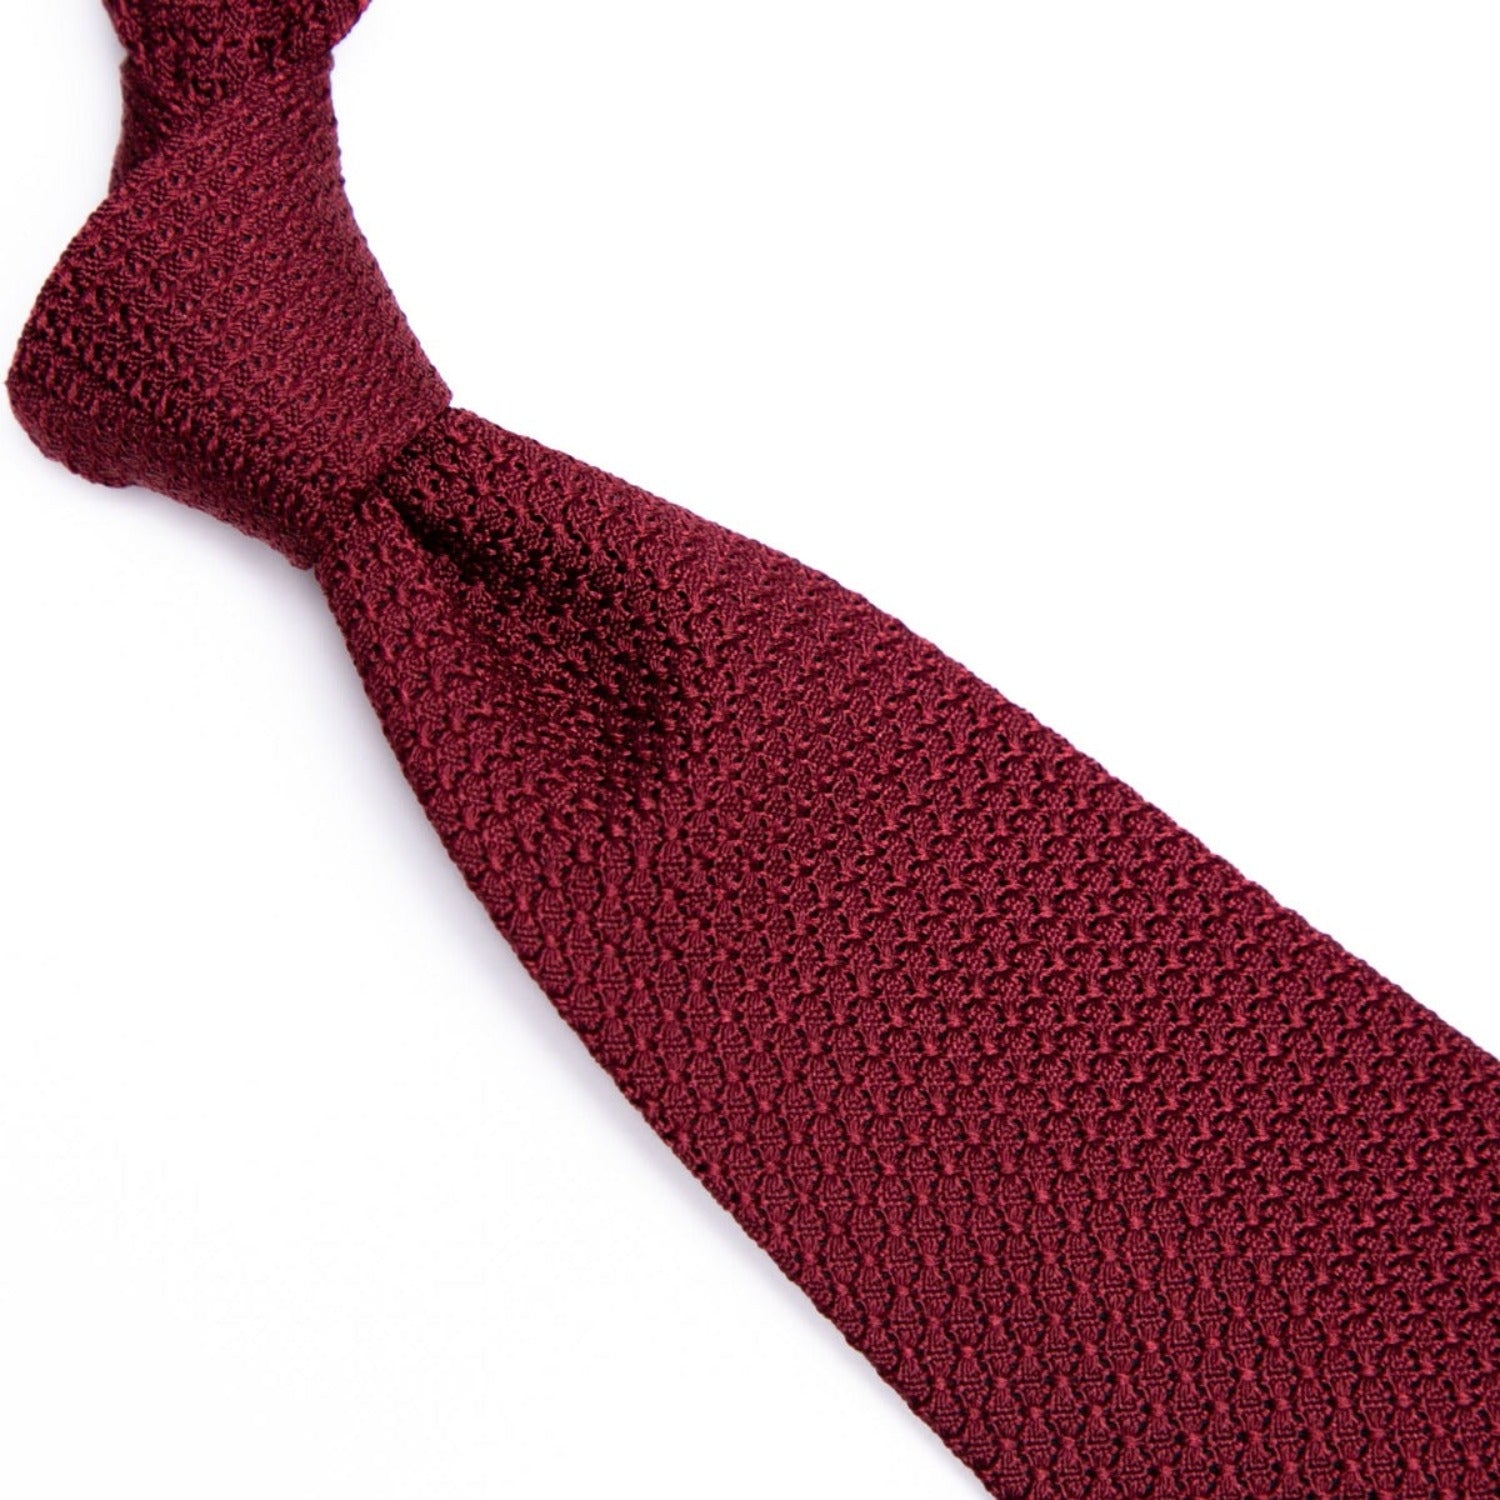 A Sovereign Grade Grenadine Grossa Ruby Tie from KirbyAllison.com on a white background.